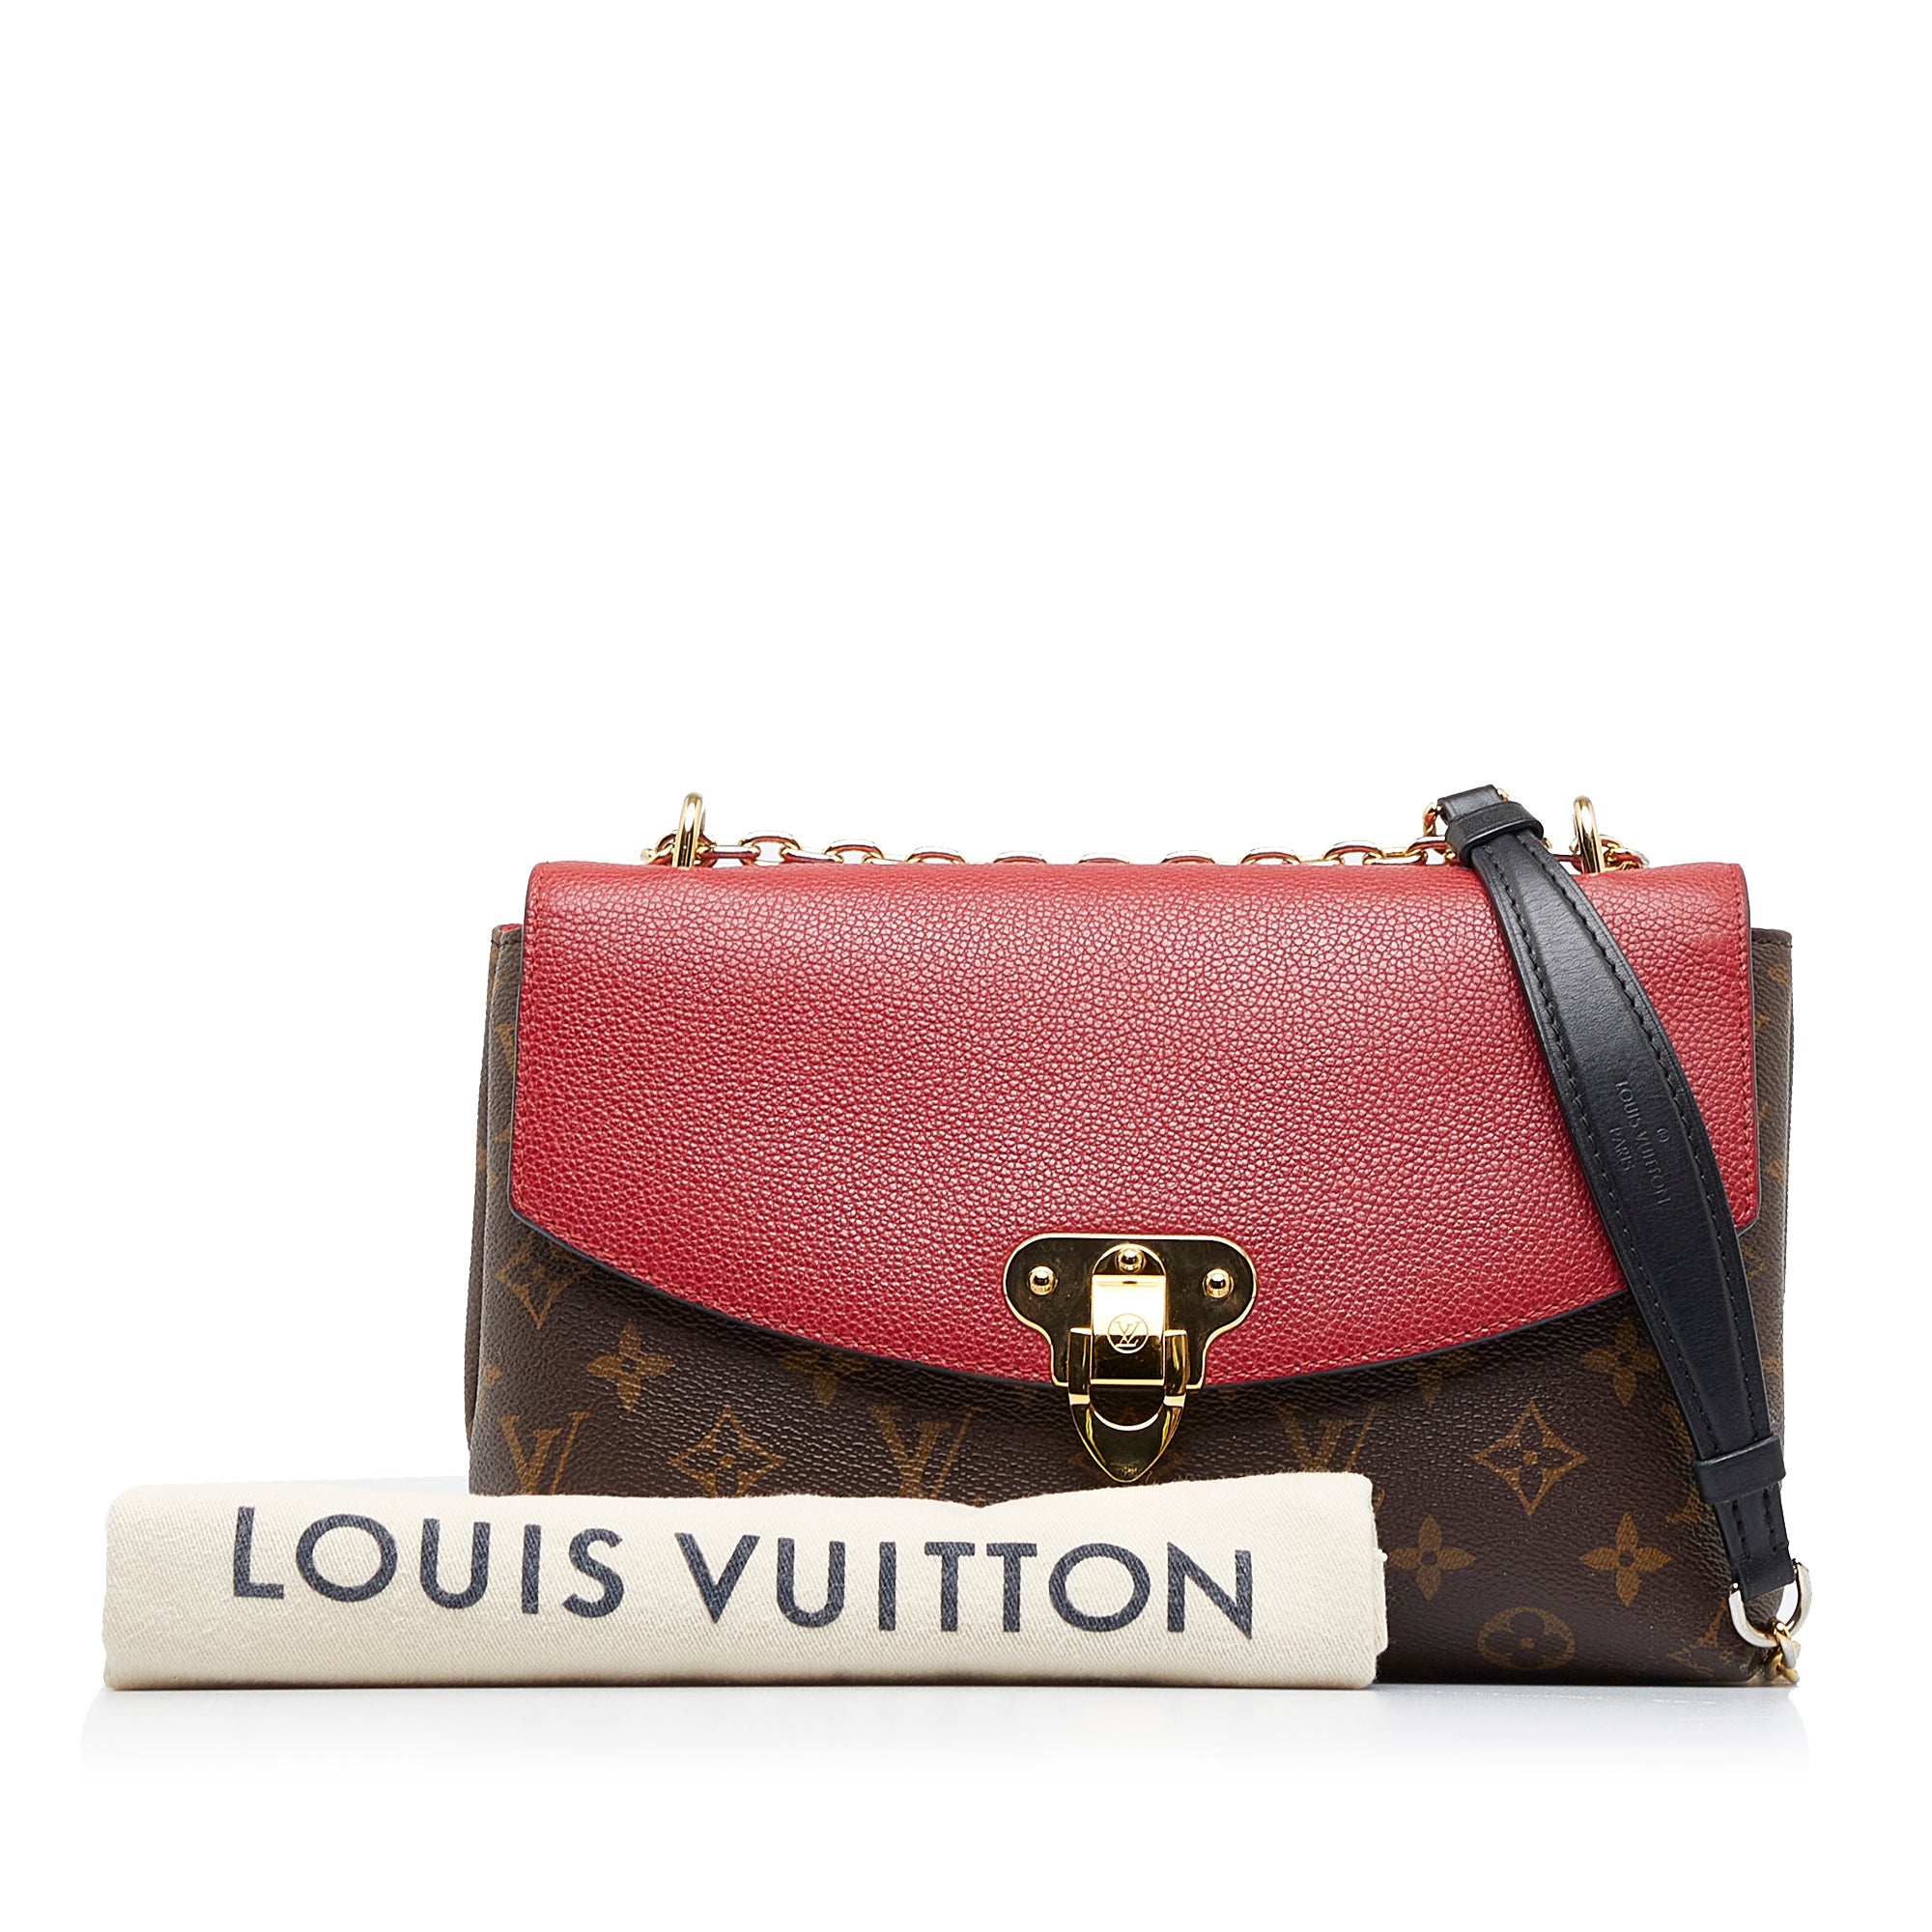 LOUIS VUITTON SAINT PLACIDE - WHAT FITS INSIDE - HOW TO STYLE 